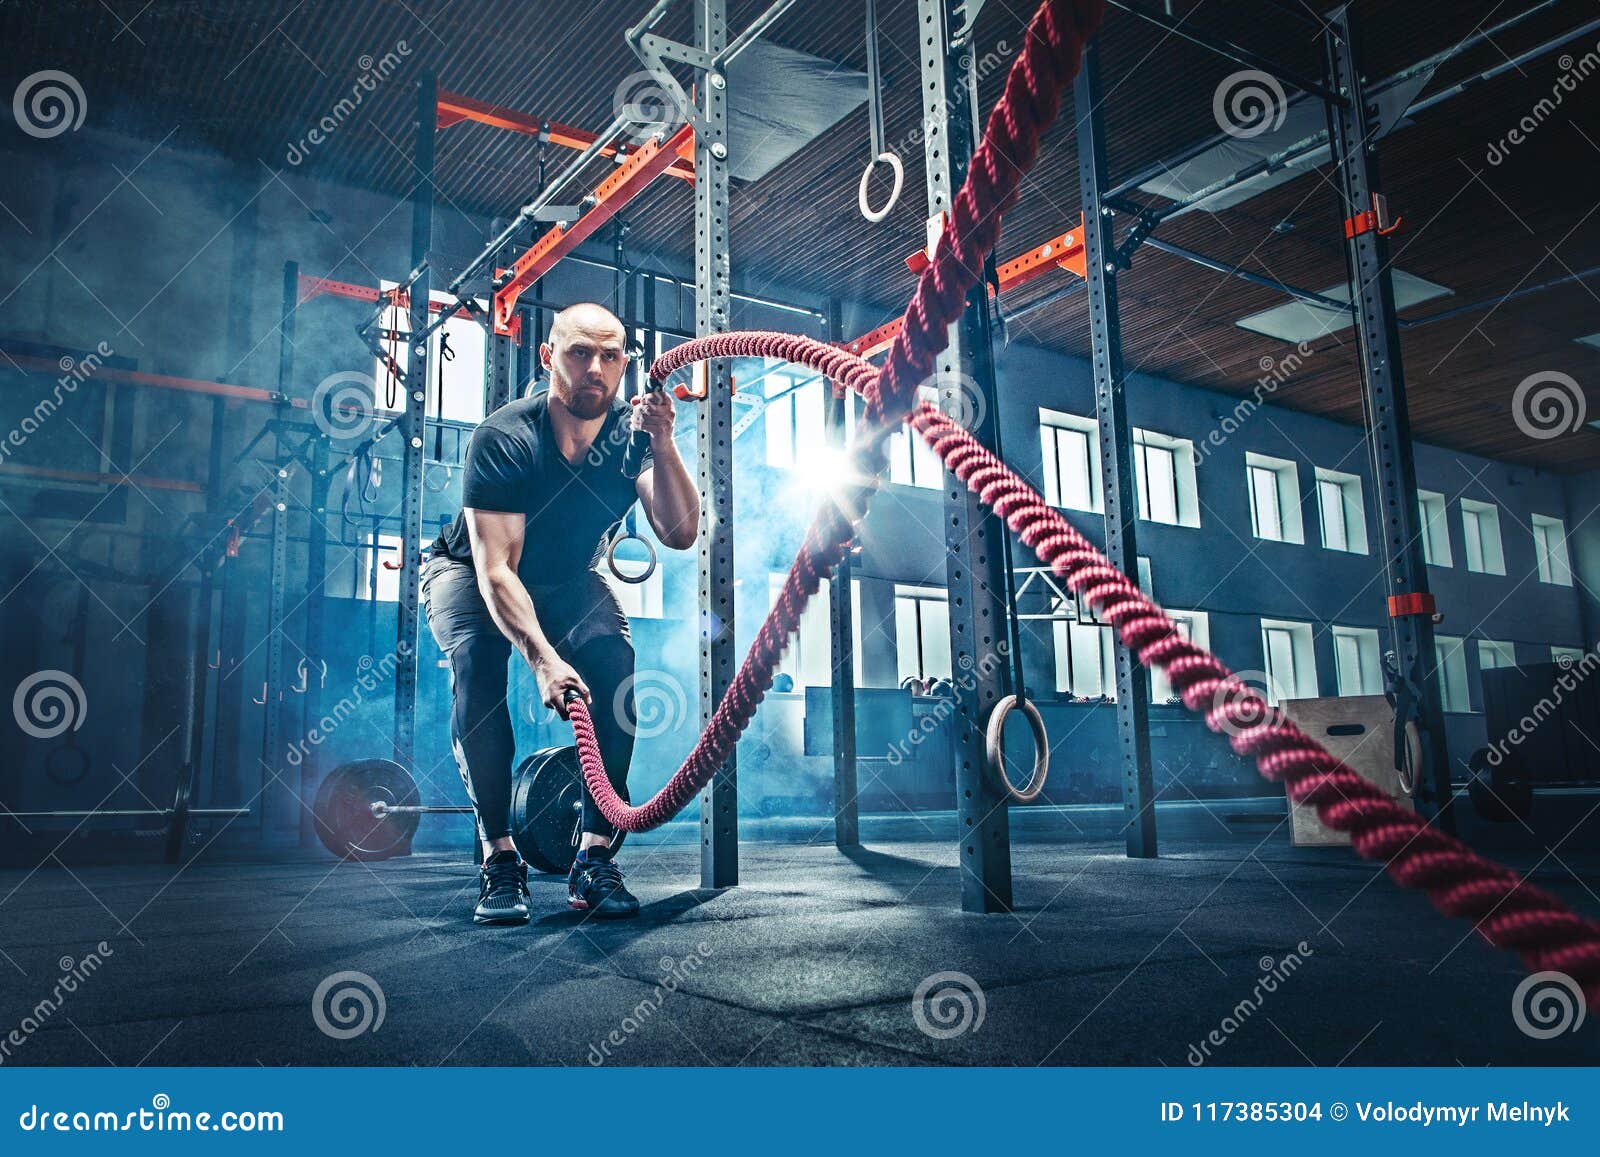 men with battle rope battle ropes exercise in the fitness gym.